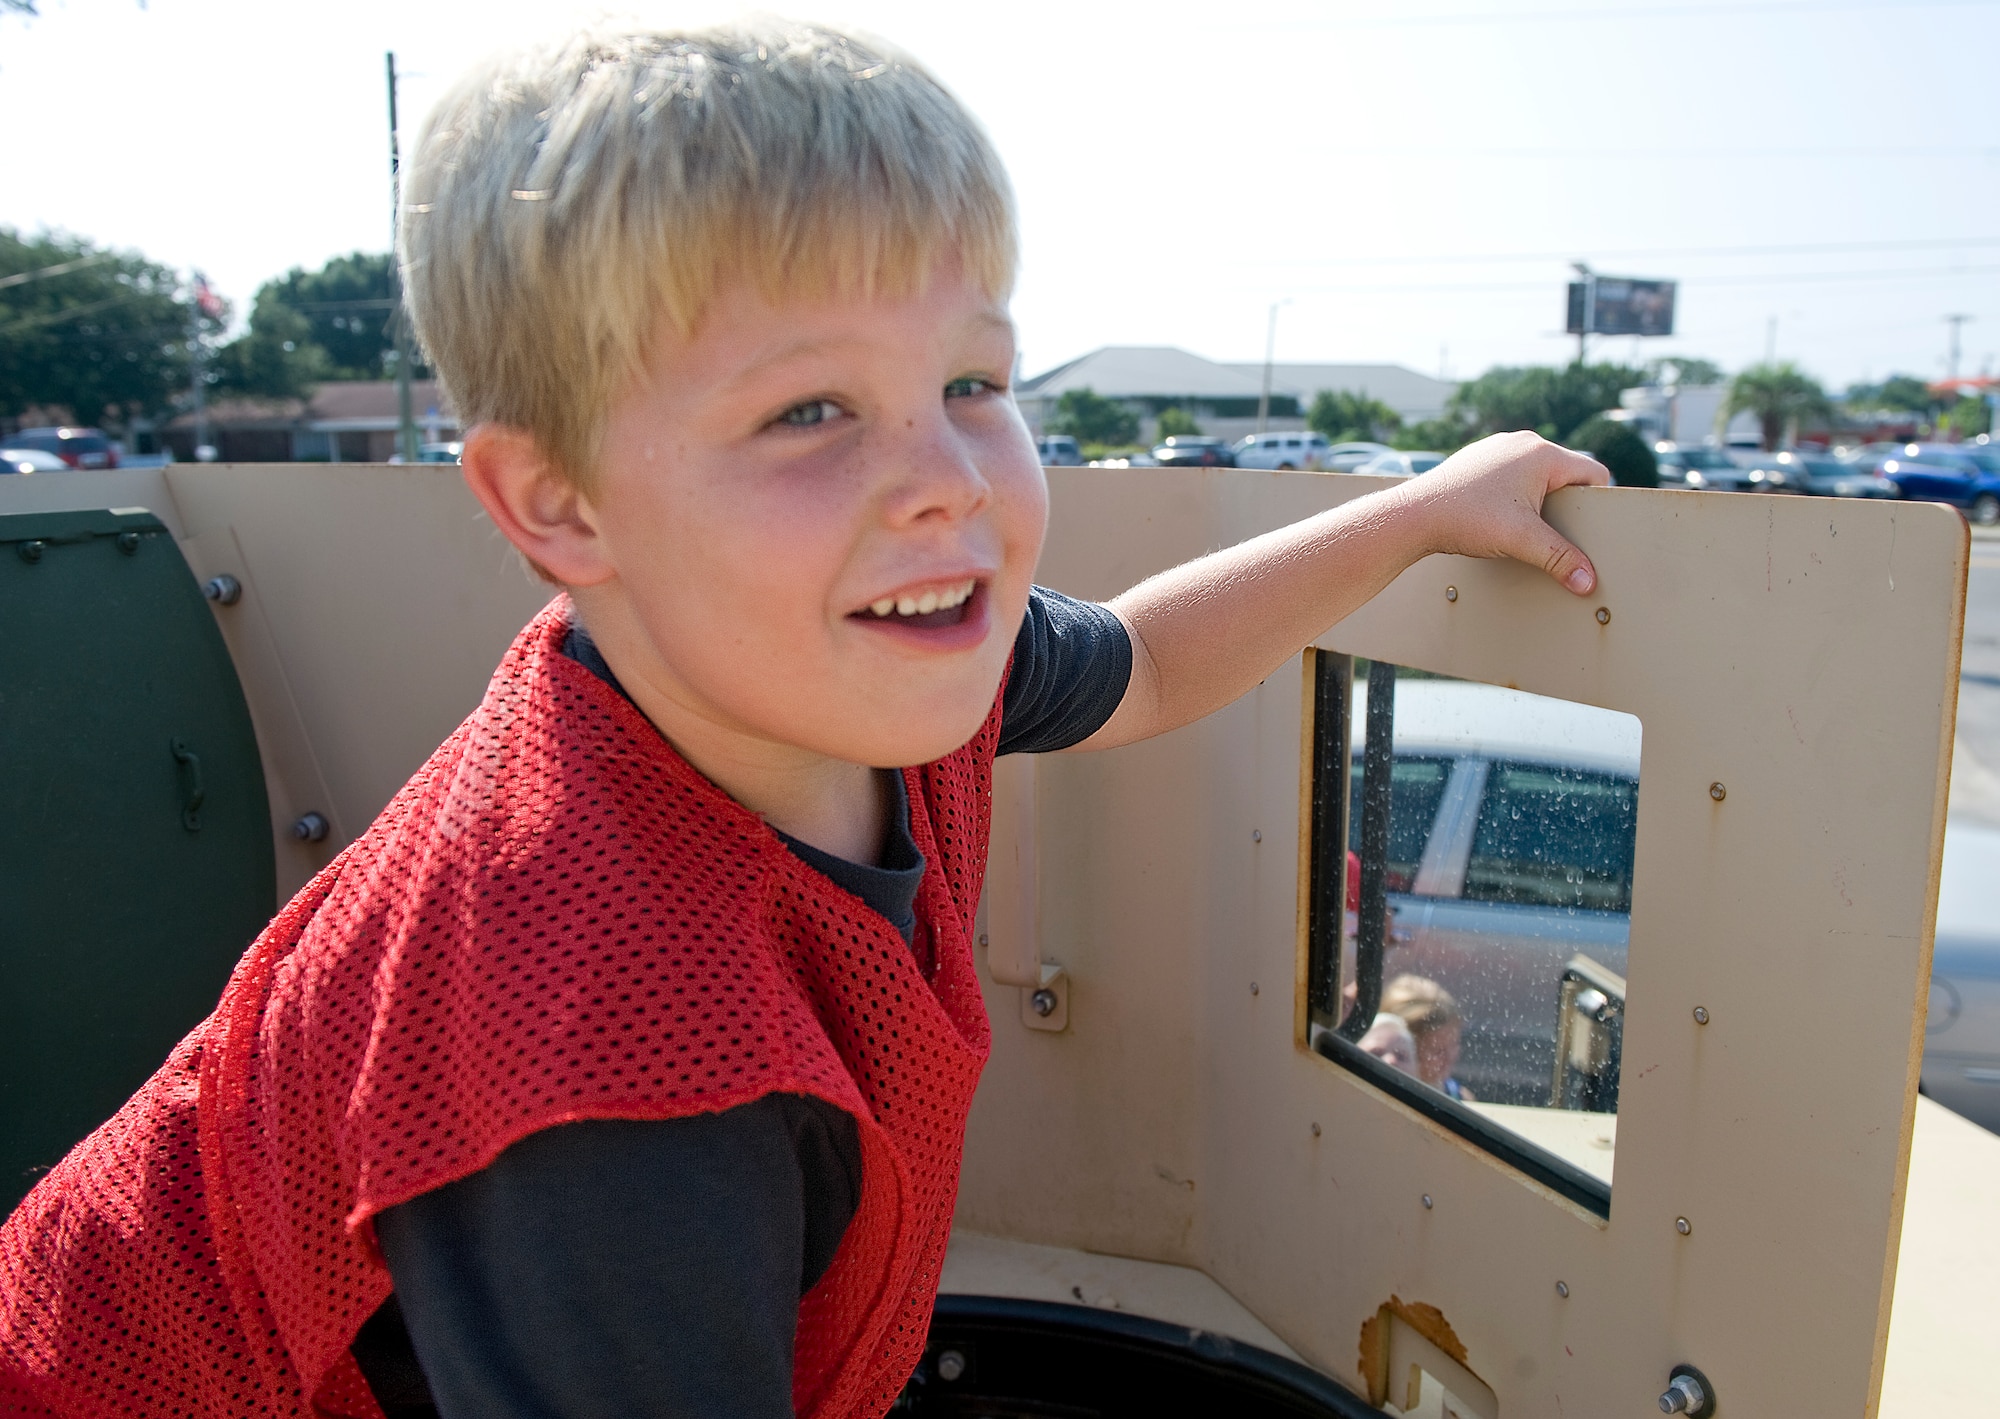 Nolan Kirby, age six, explores the gun turret of a 1st Special Operations Civil Engineer Squadron Humvee at the 16th Annual Truck Day at the Destin Community Center in Destin, Fla., Aug. 7, 2014. Airmen aided children in exploring various parts of the Humvee throughout the morning to help better their understanding of the equipment the military uses. (U.S. Air Force photo/Senior Airman Kentavist P. Brackin)